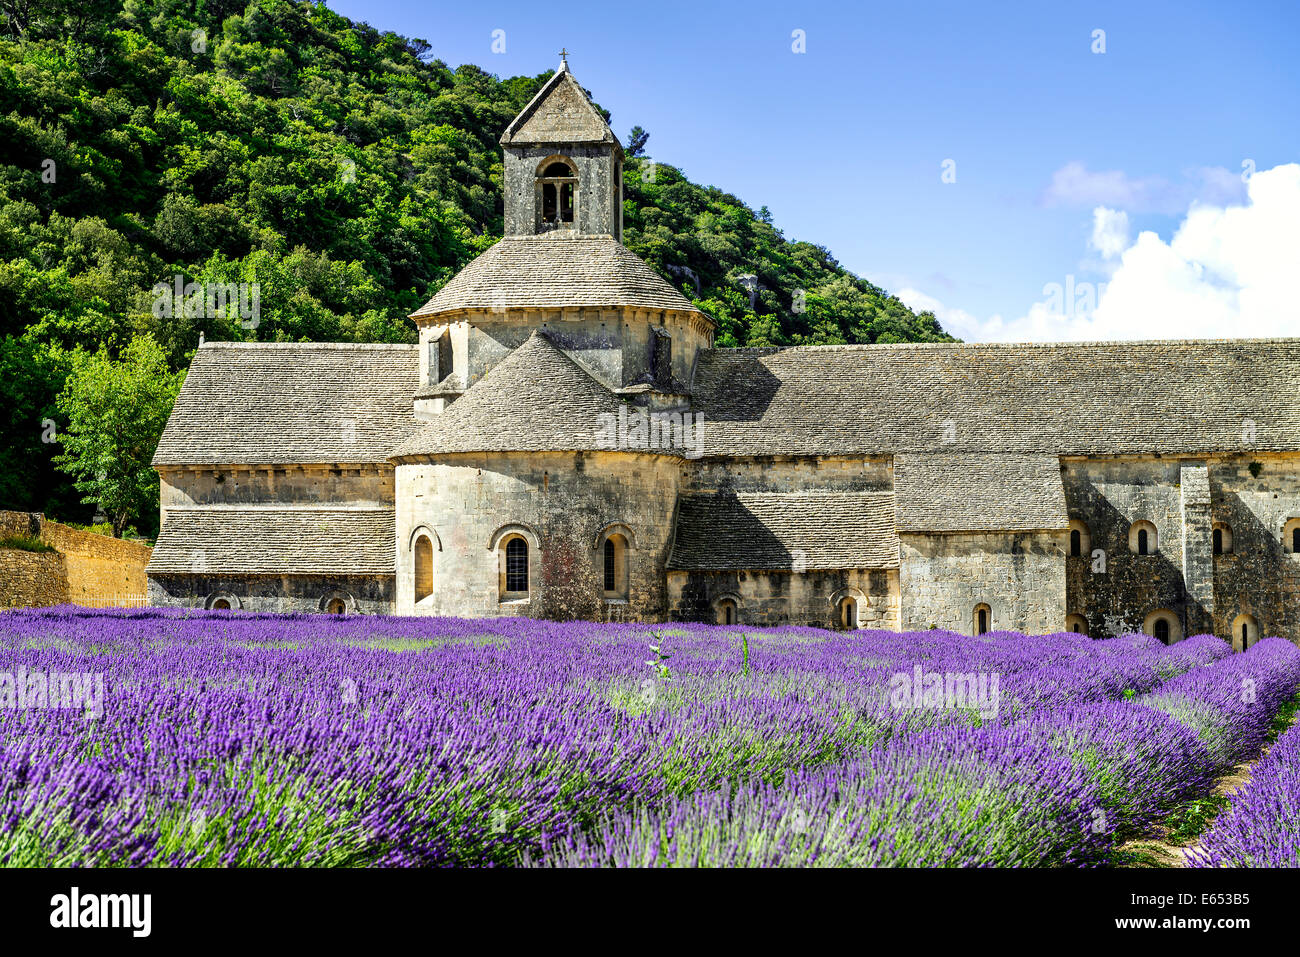 Abbey of Senanque and blooming rows lavender flowers. Gordes, Luberon, Vaucluse, Provence, France. Stock Photo